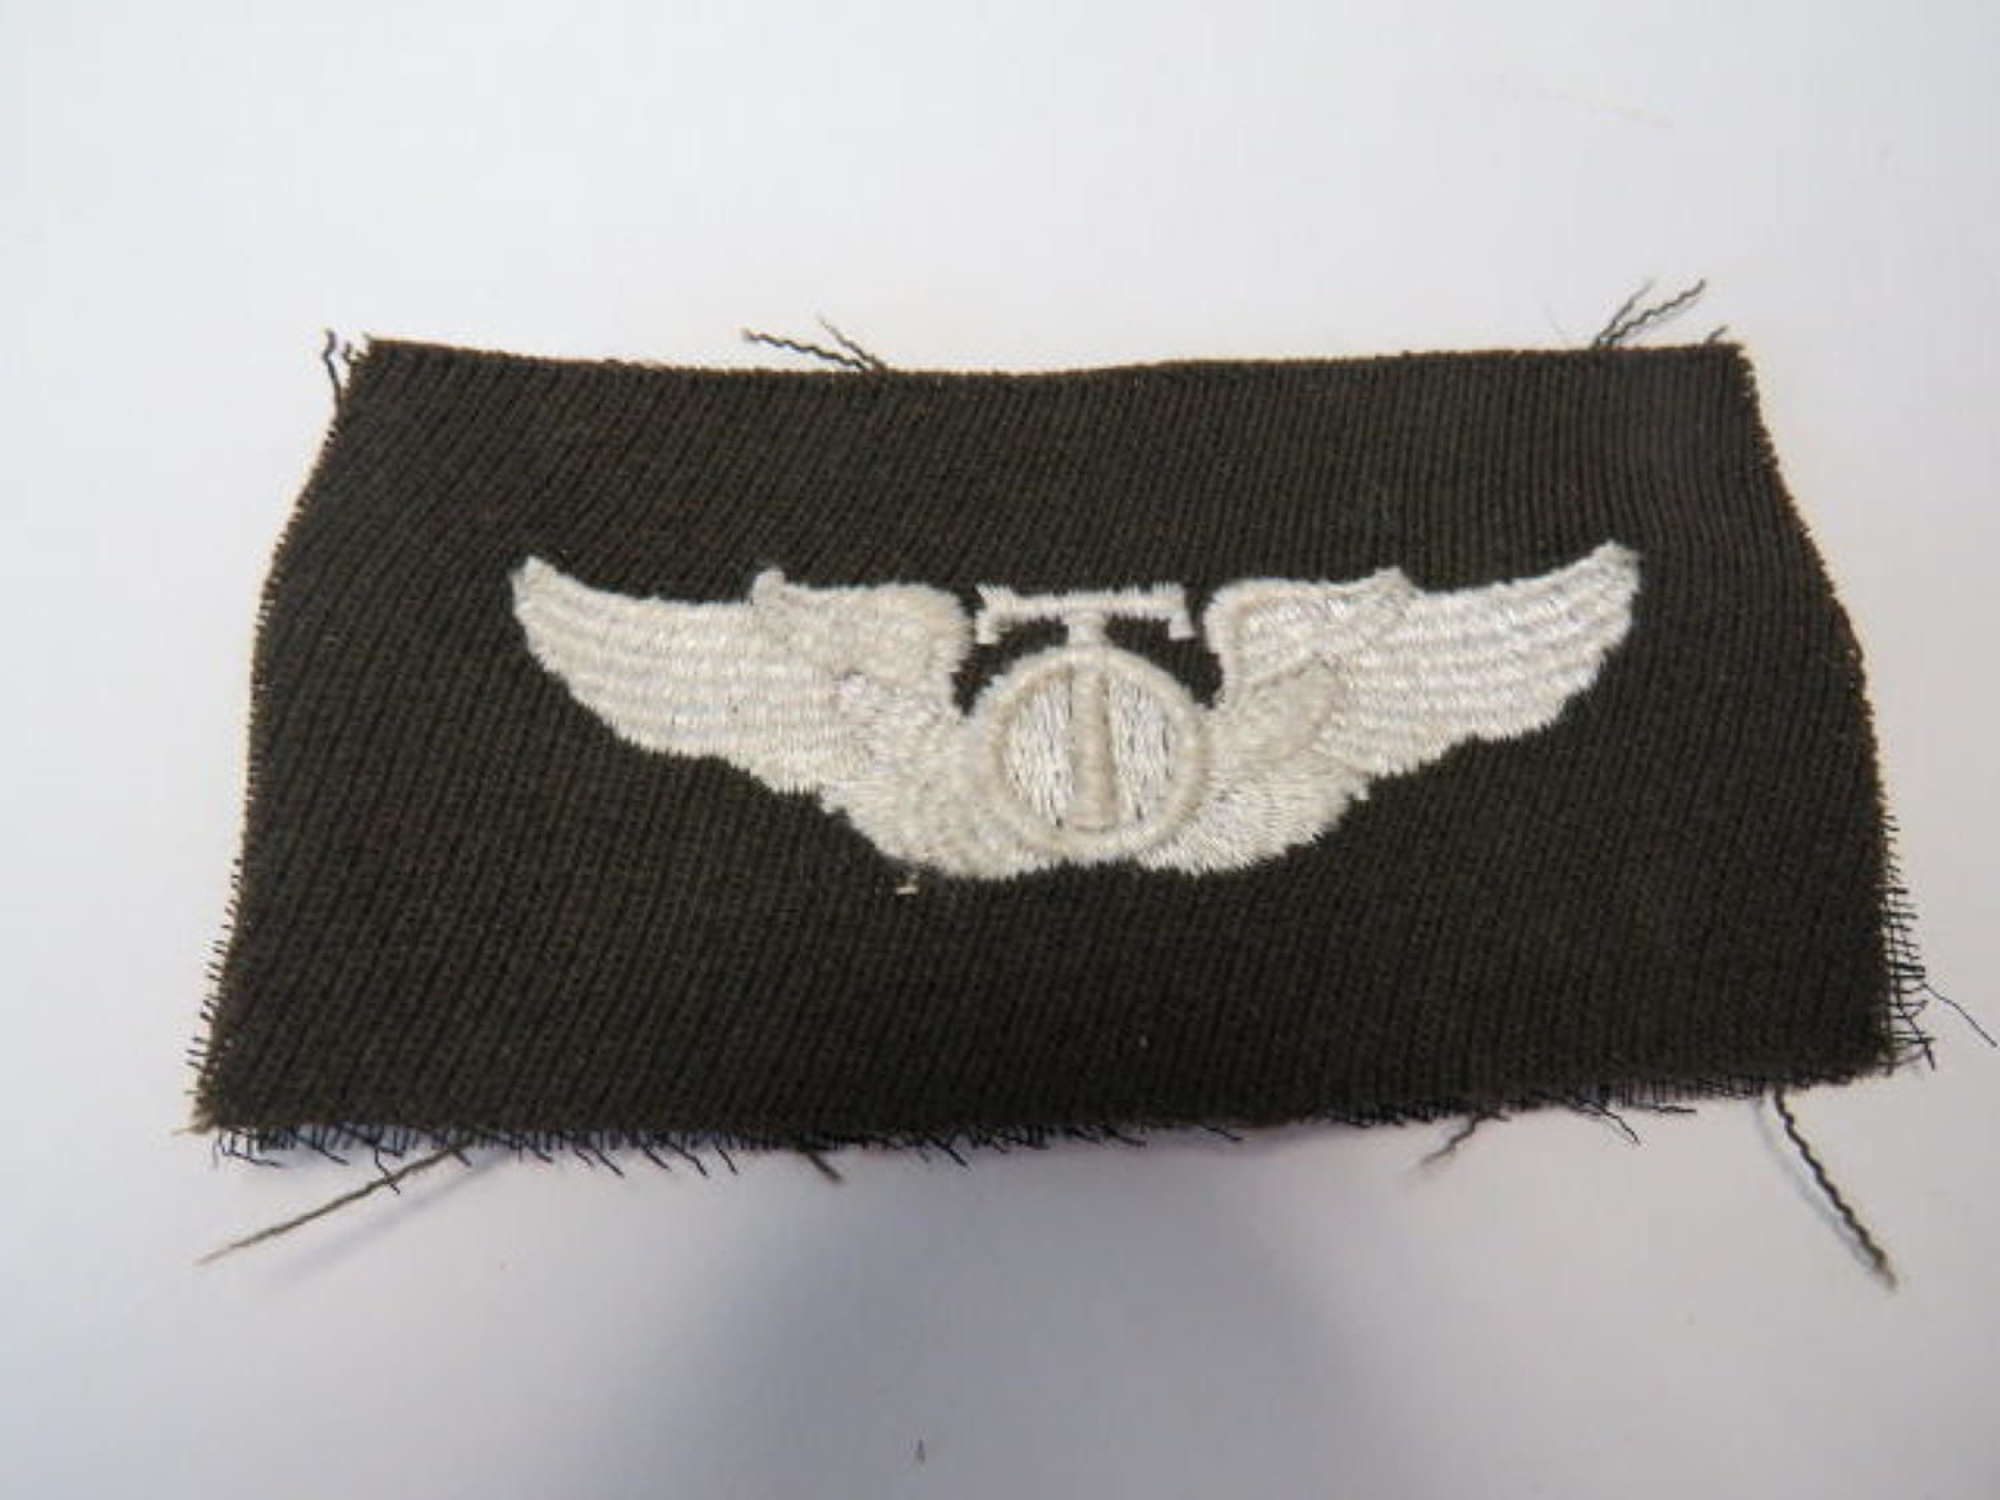 USAAF Technical Observer Wings